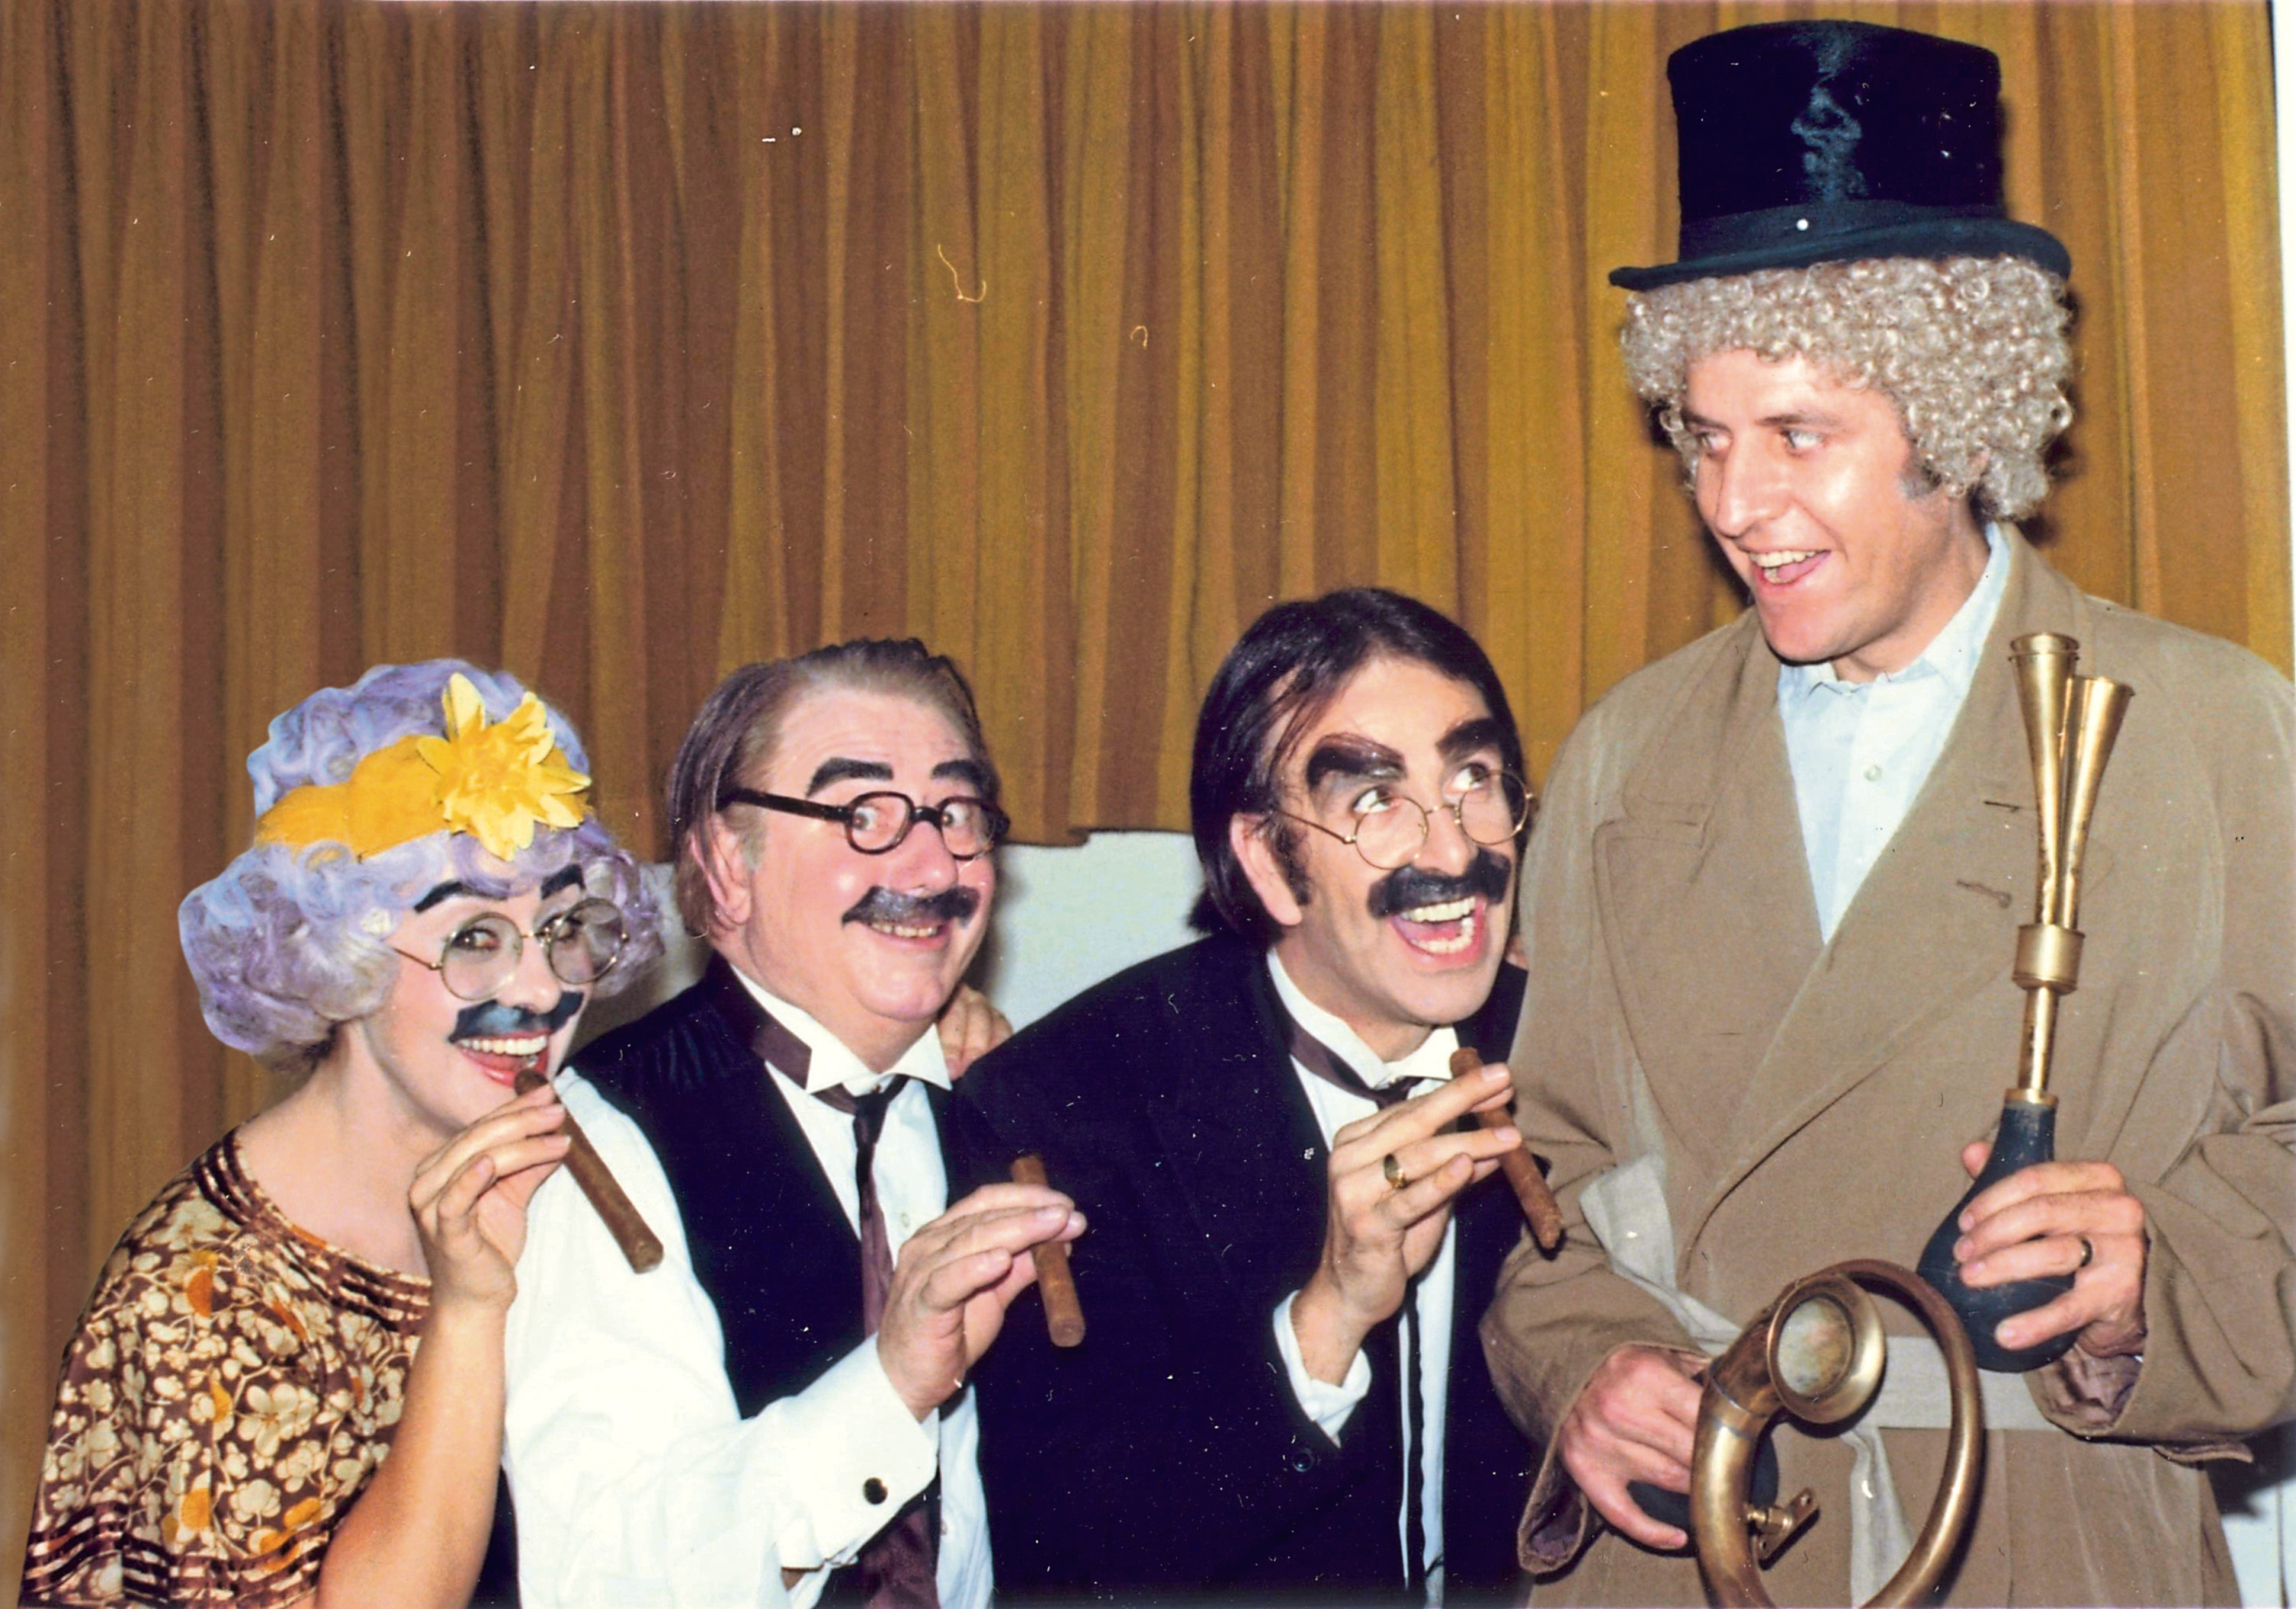 From left: Jan Hunt, Peter Glaze, Don Maclean and Ed Stewart dressed up as the Marx Brothers